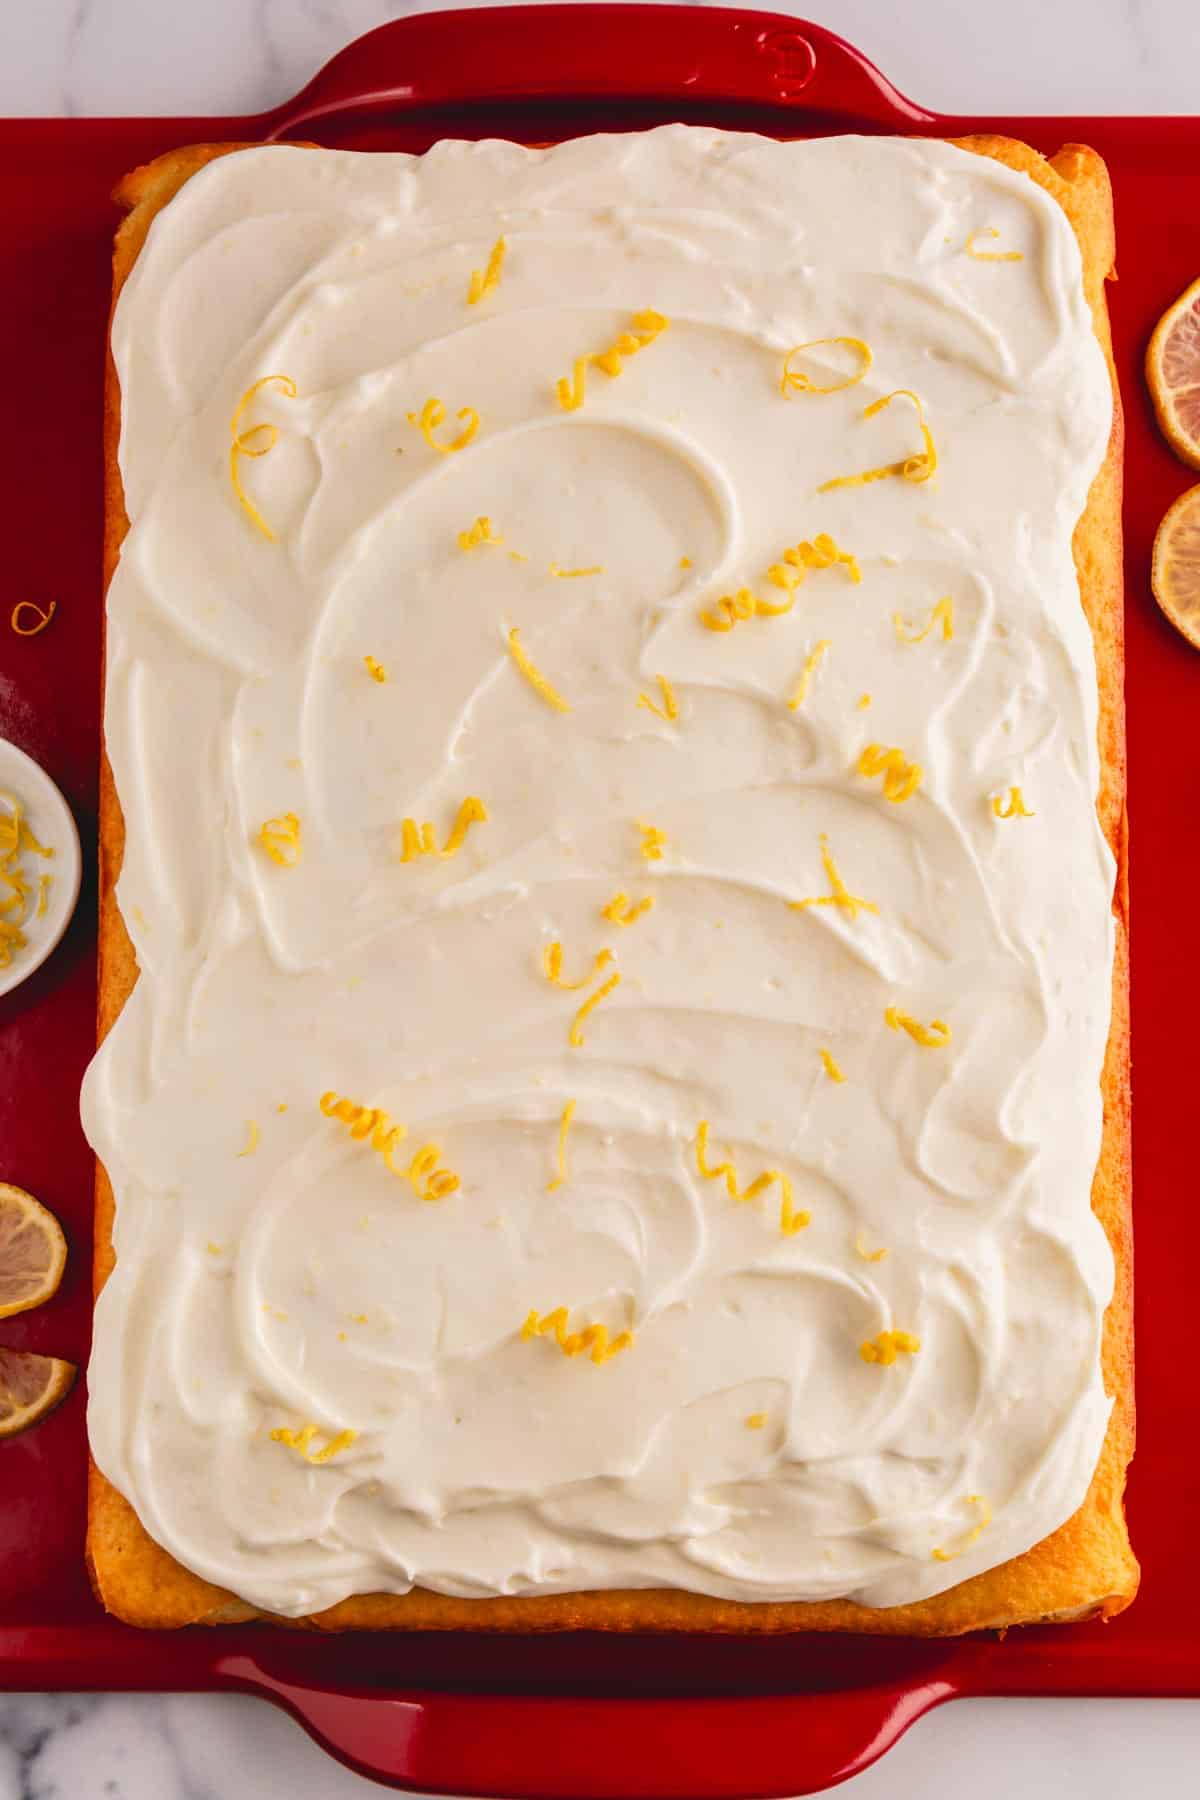 A lemon cream cheese cake topped with lemon cream cheese frosting and lemon zest.